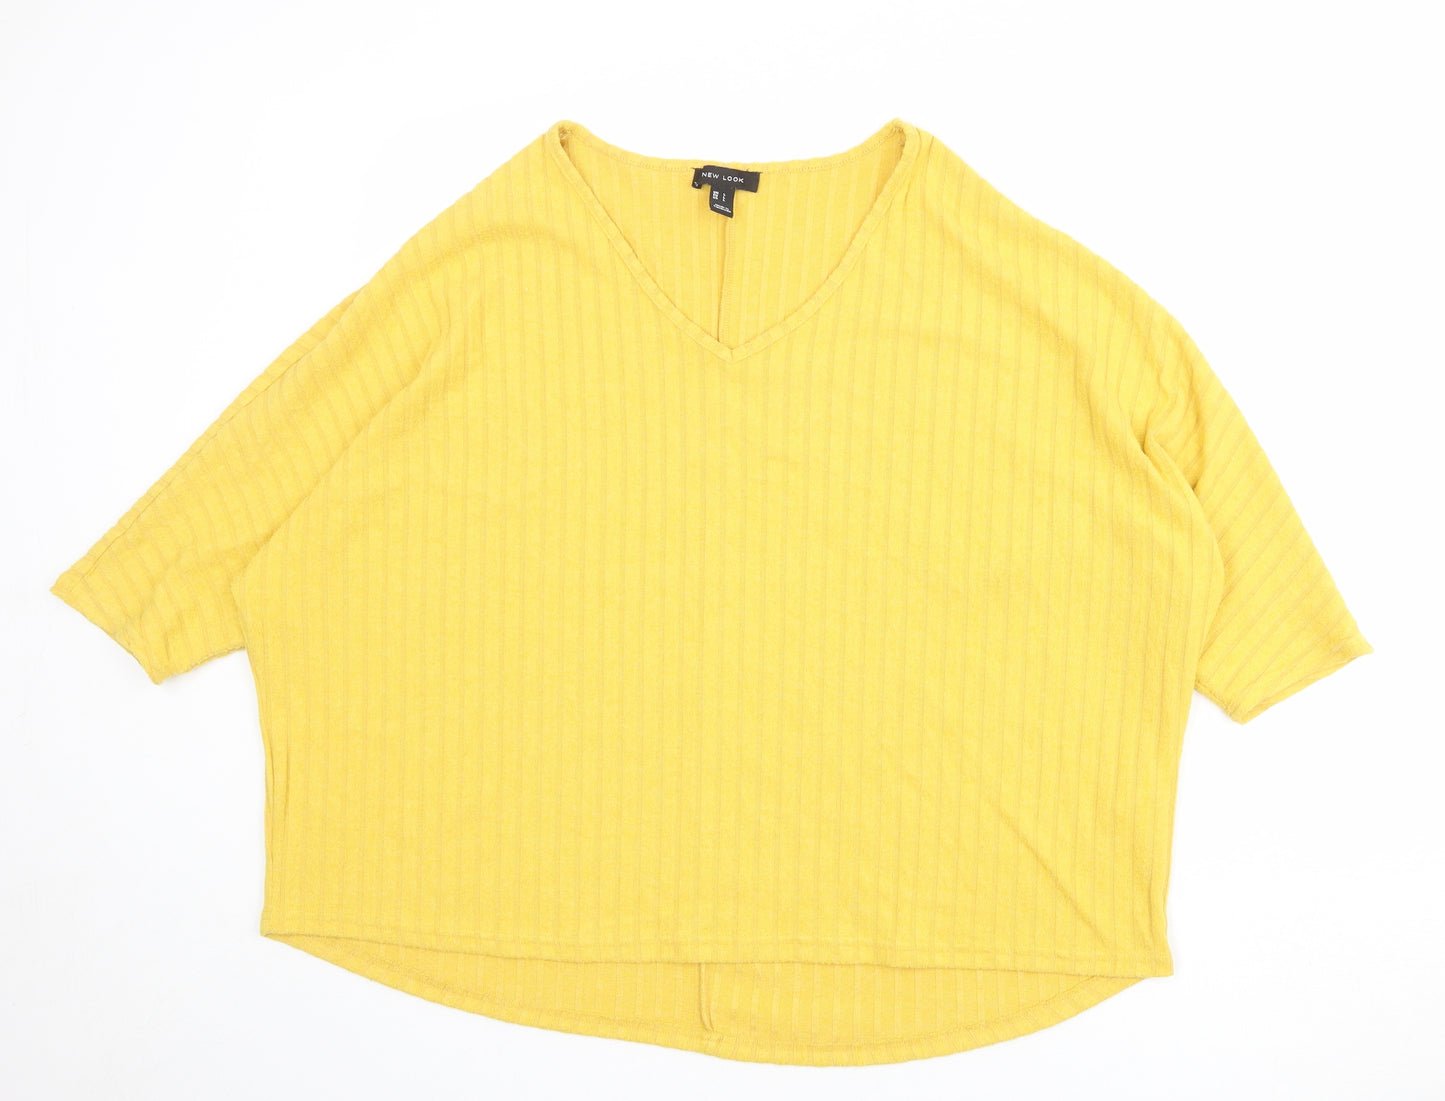 New Look Womens Yellow V-Neck Polyester Pullover Jumper Size L